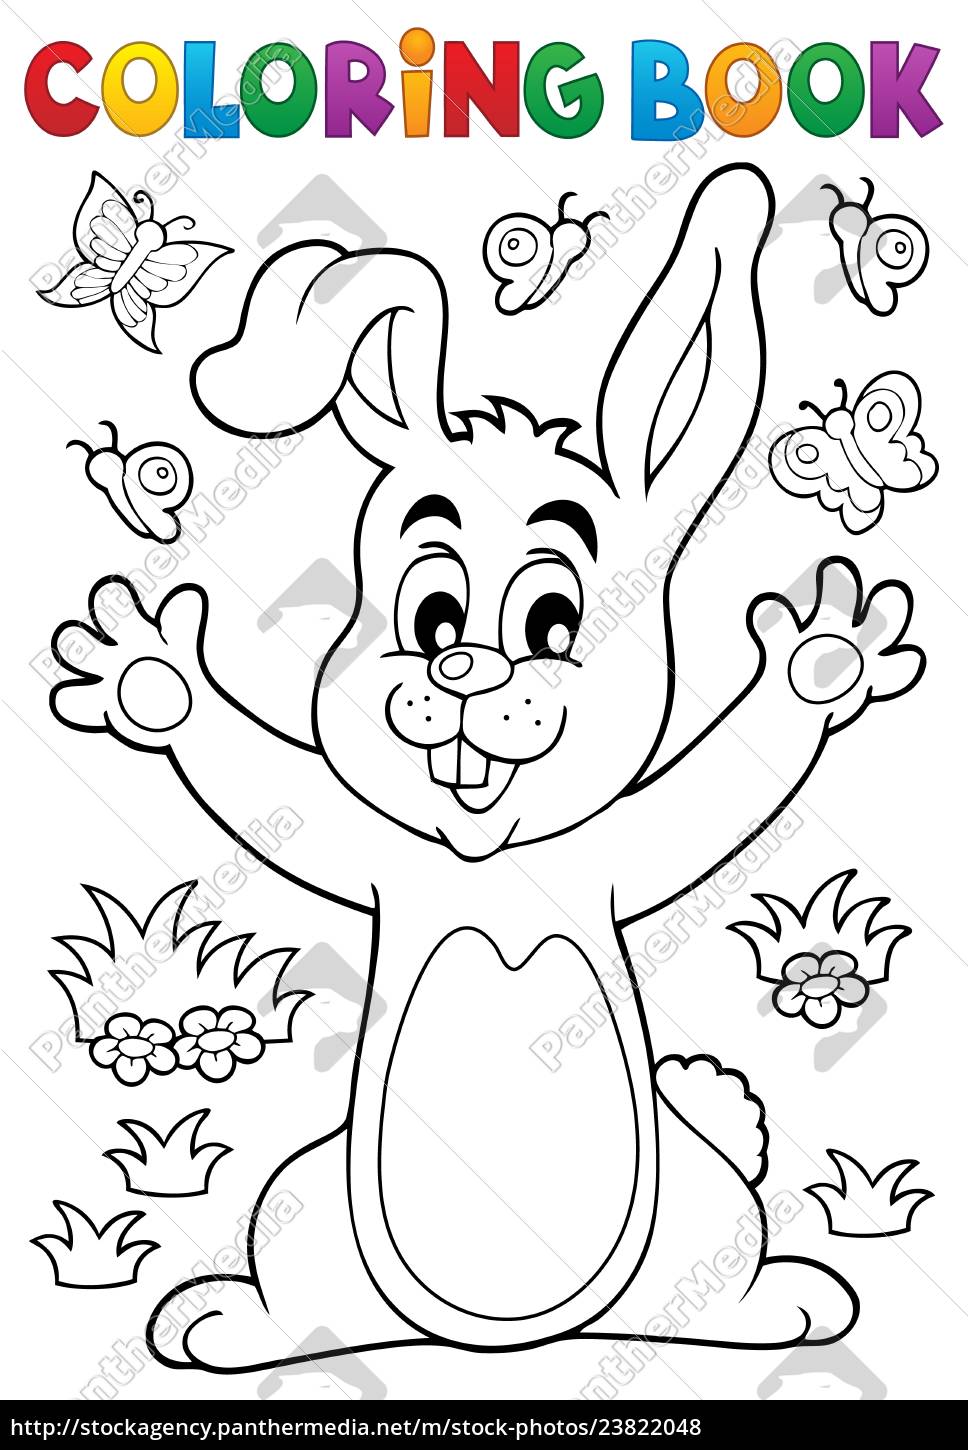 Download Coloring Book Rabbit Theme 6 Royalty Free Photo 23822048 Panthermedia Stock Agency